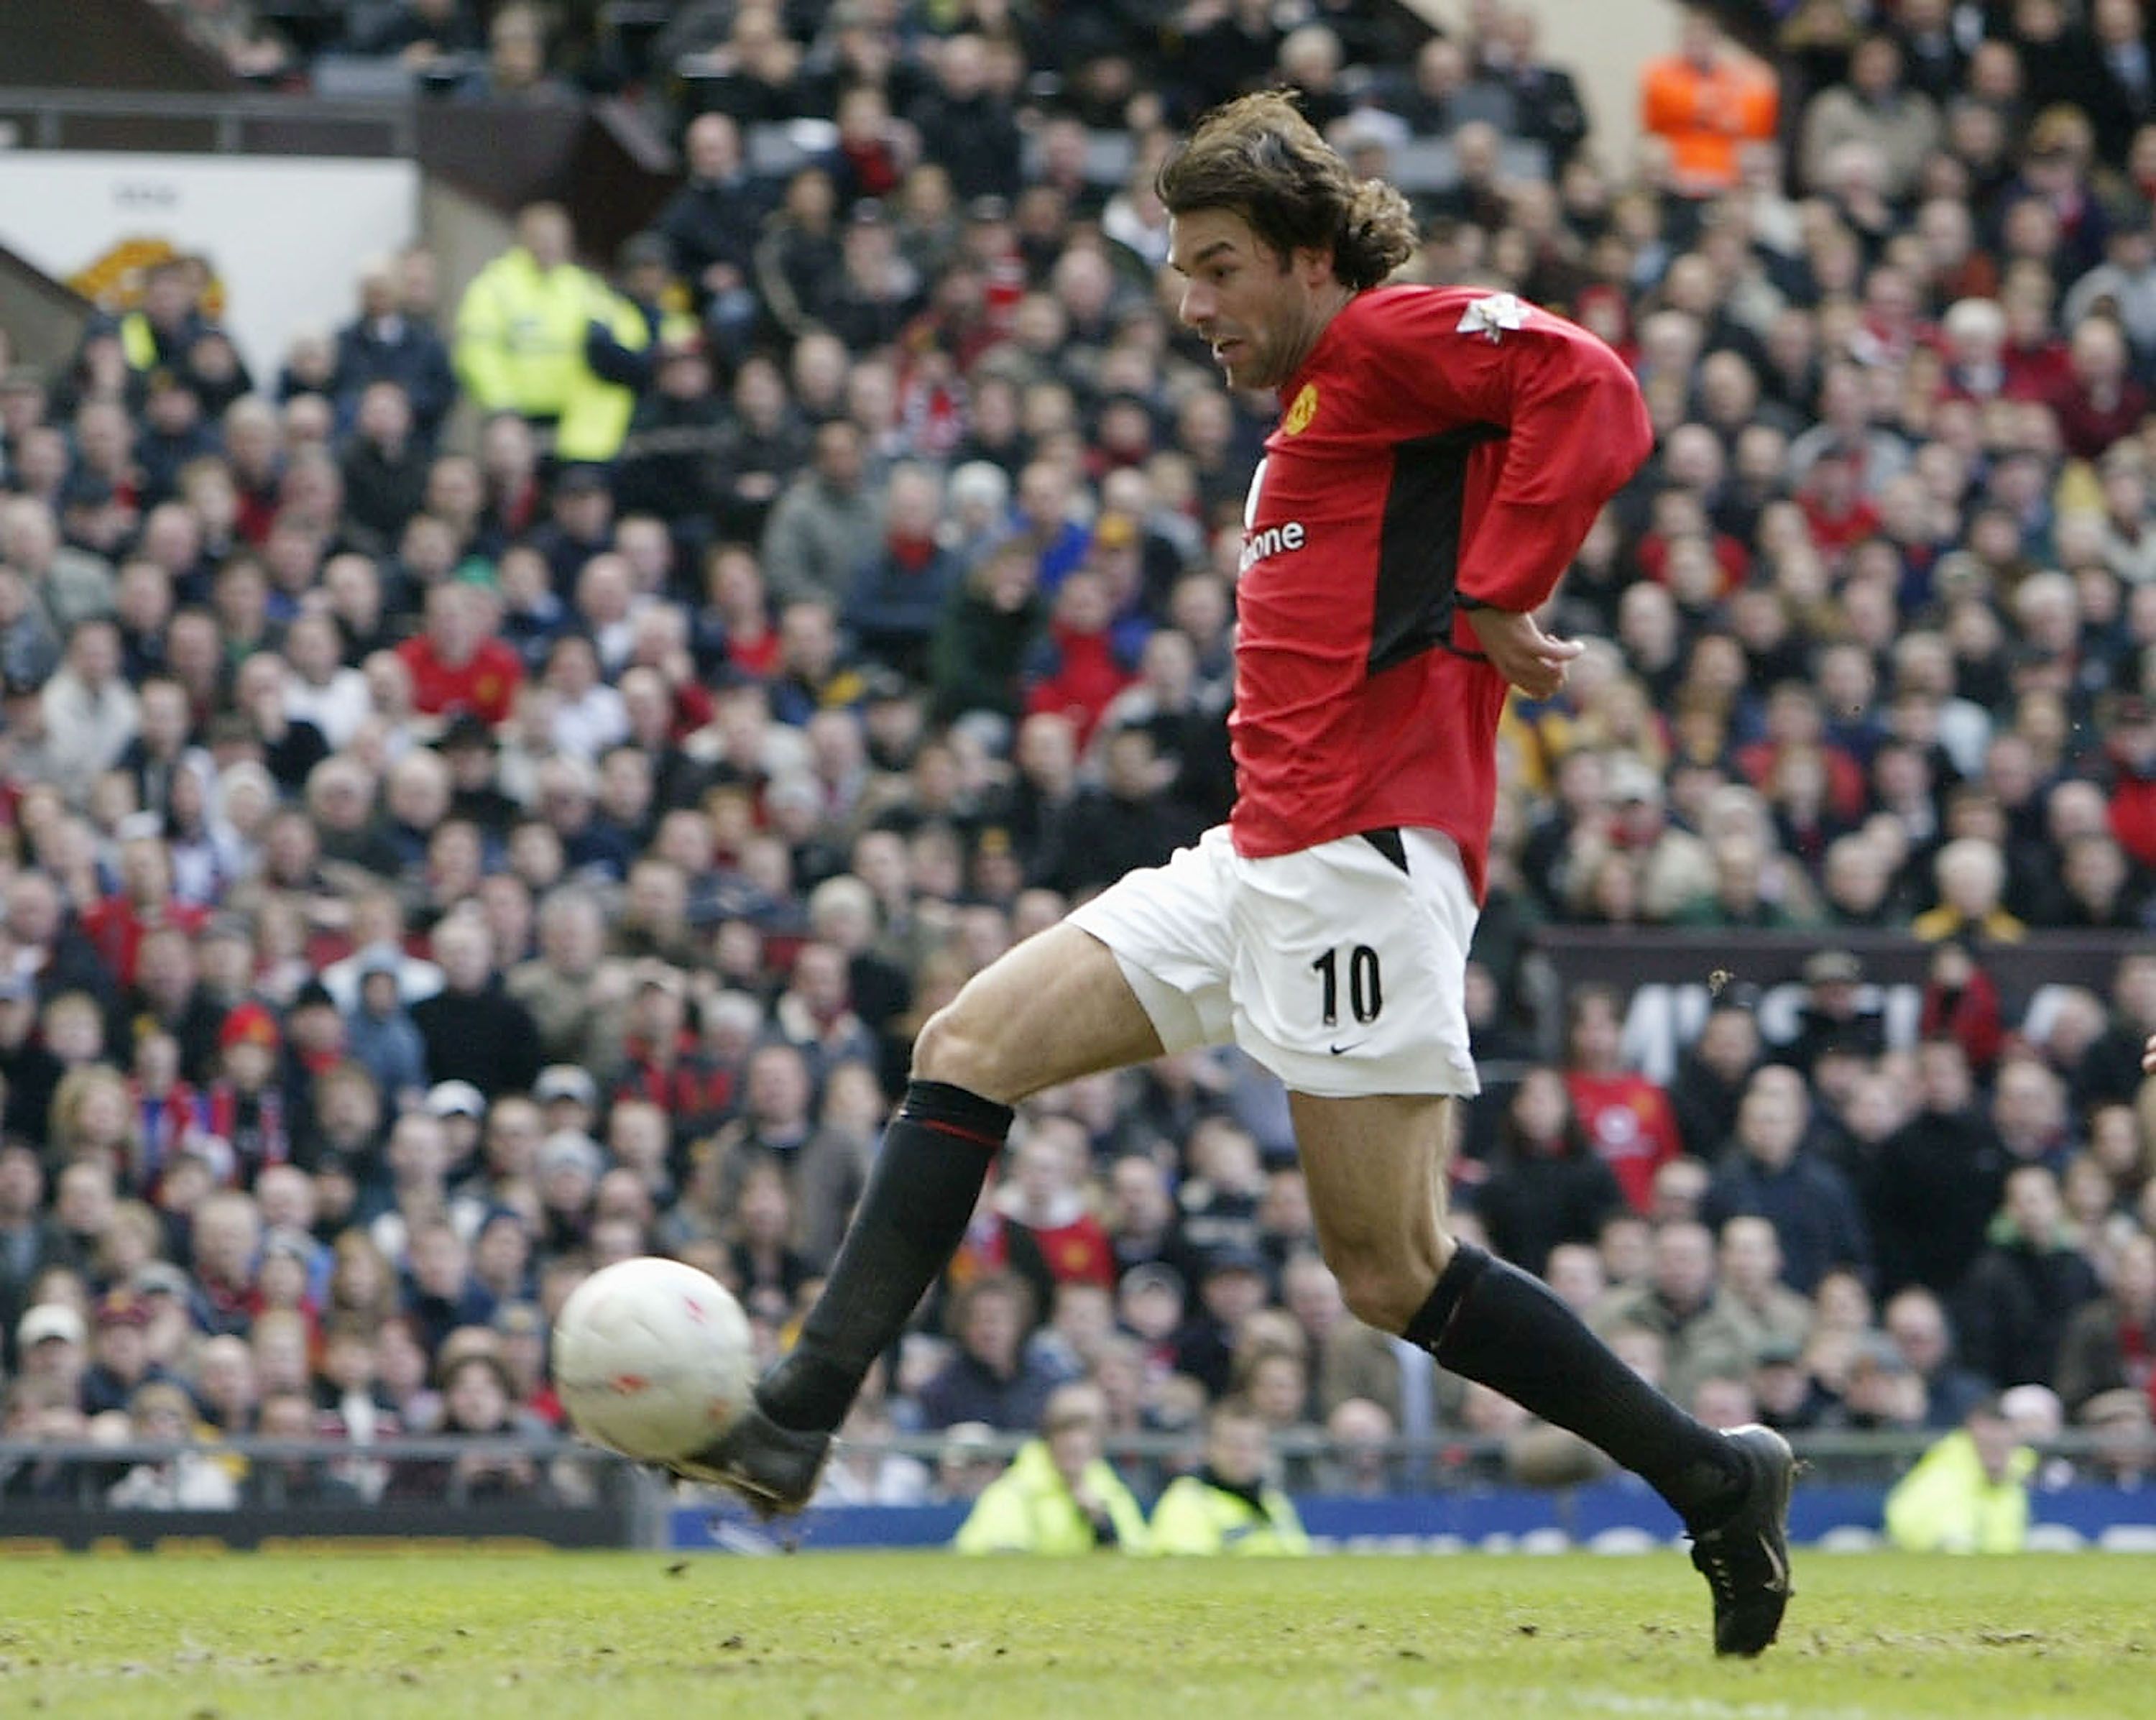 MANCHESTER, ENGLAND - MARCH 6: Ruud Van Nistelrooy of Man Utd scores the first goal during the FA Cup Quarter Final match between Manchester United and Fulham at Old Trafford on March 6, 2004 in Manchester, England. (Photo by Alex Livesey/Getty Images)